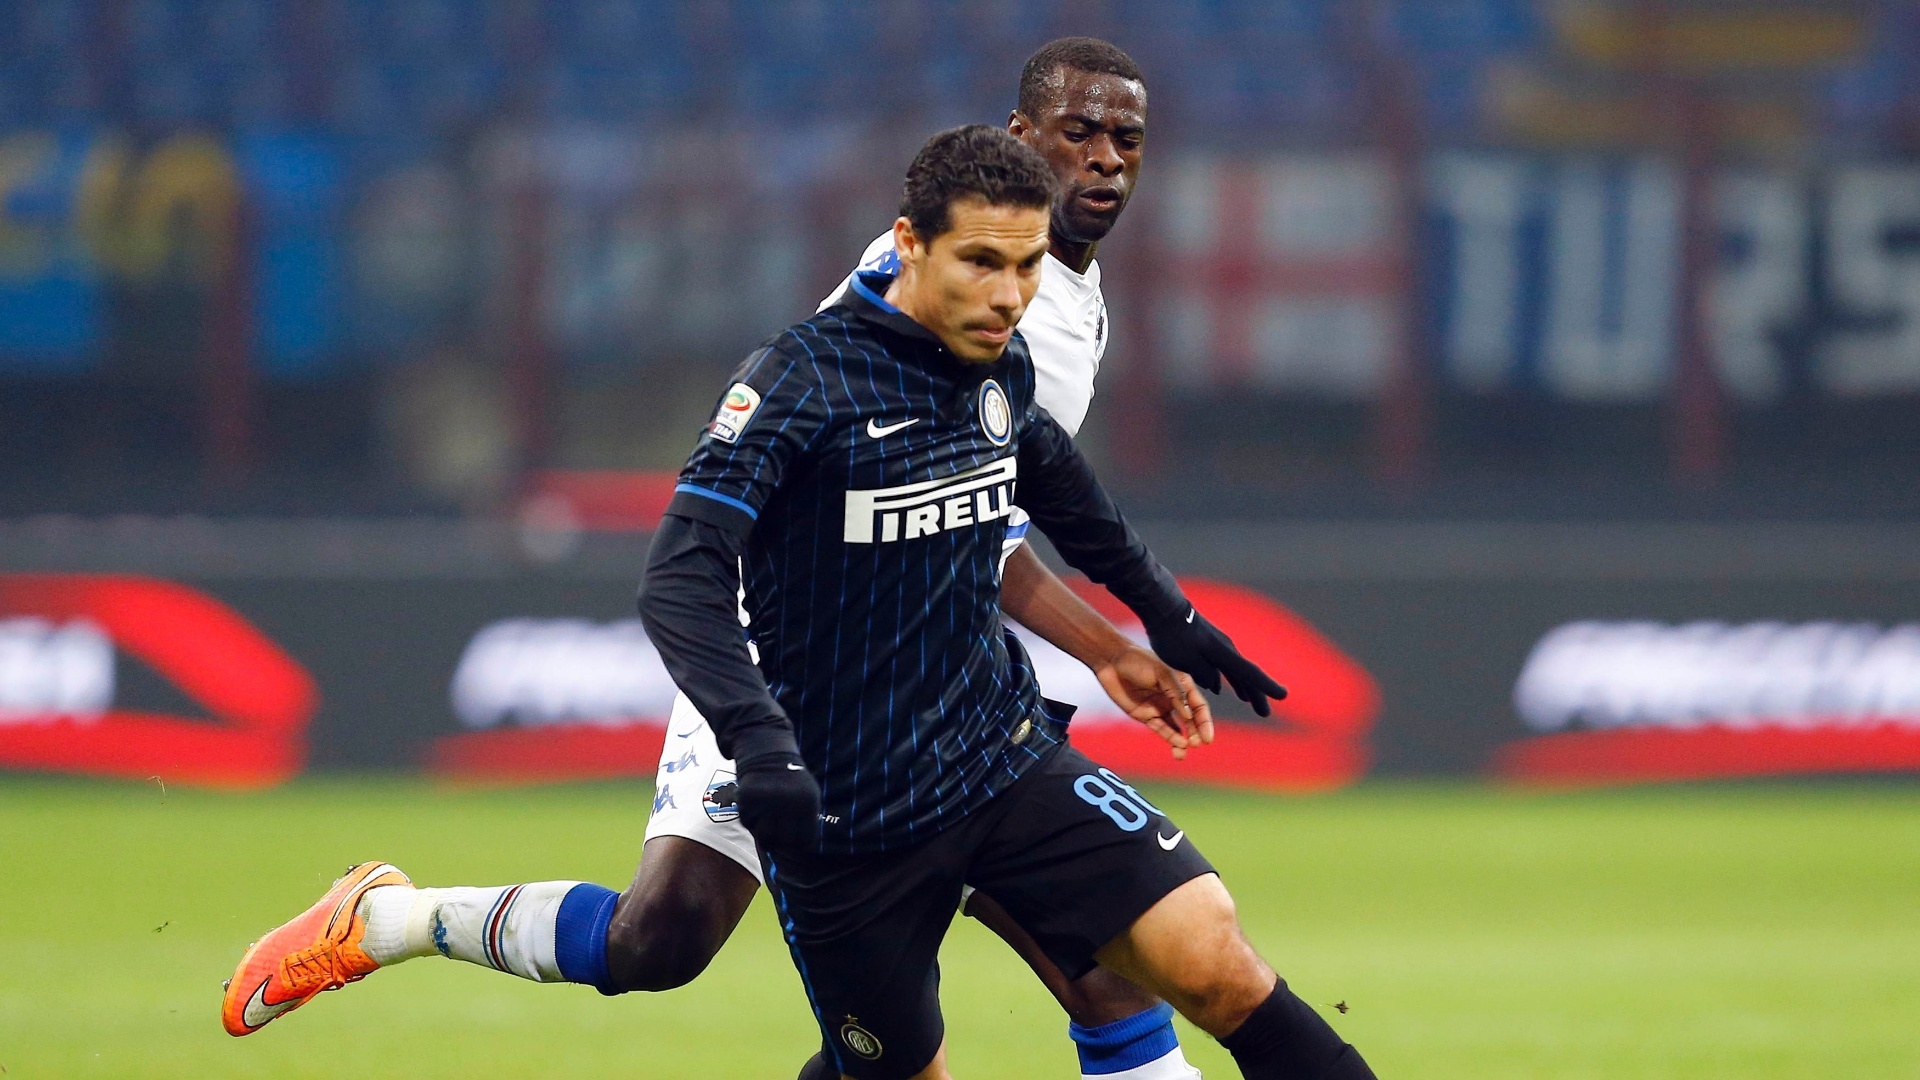 Hernanes: “It was important to win, even if..”